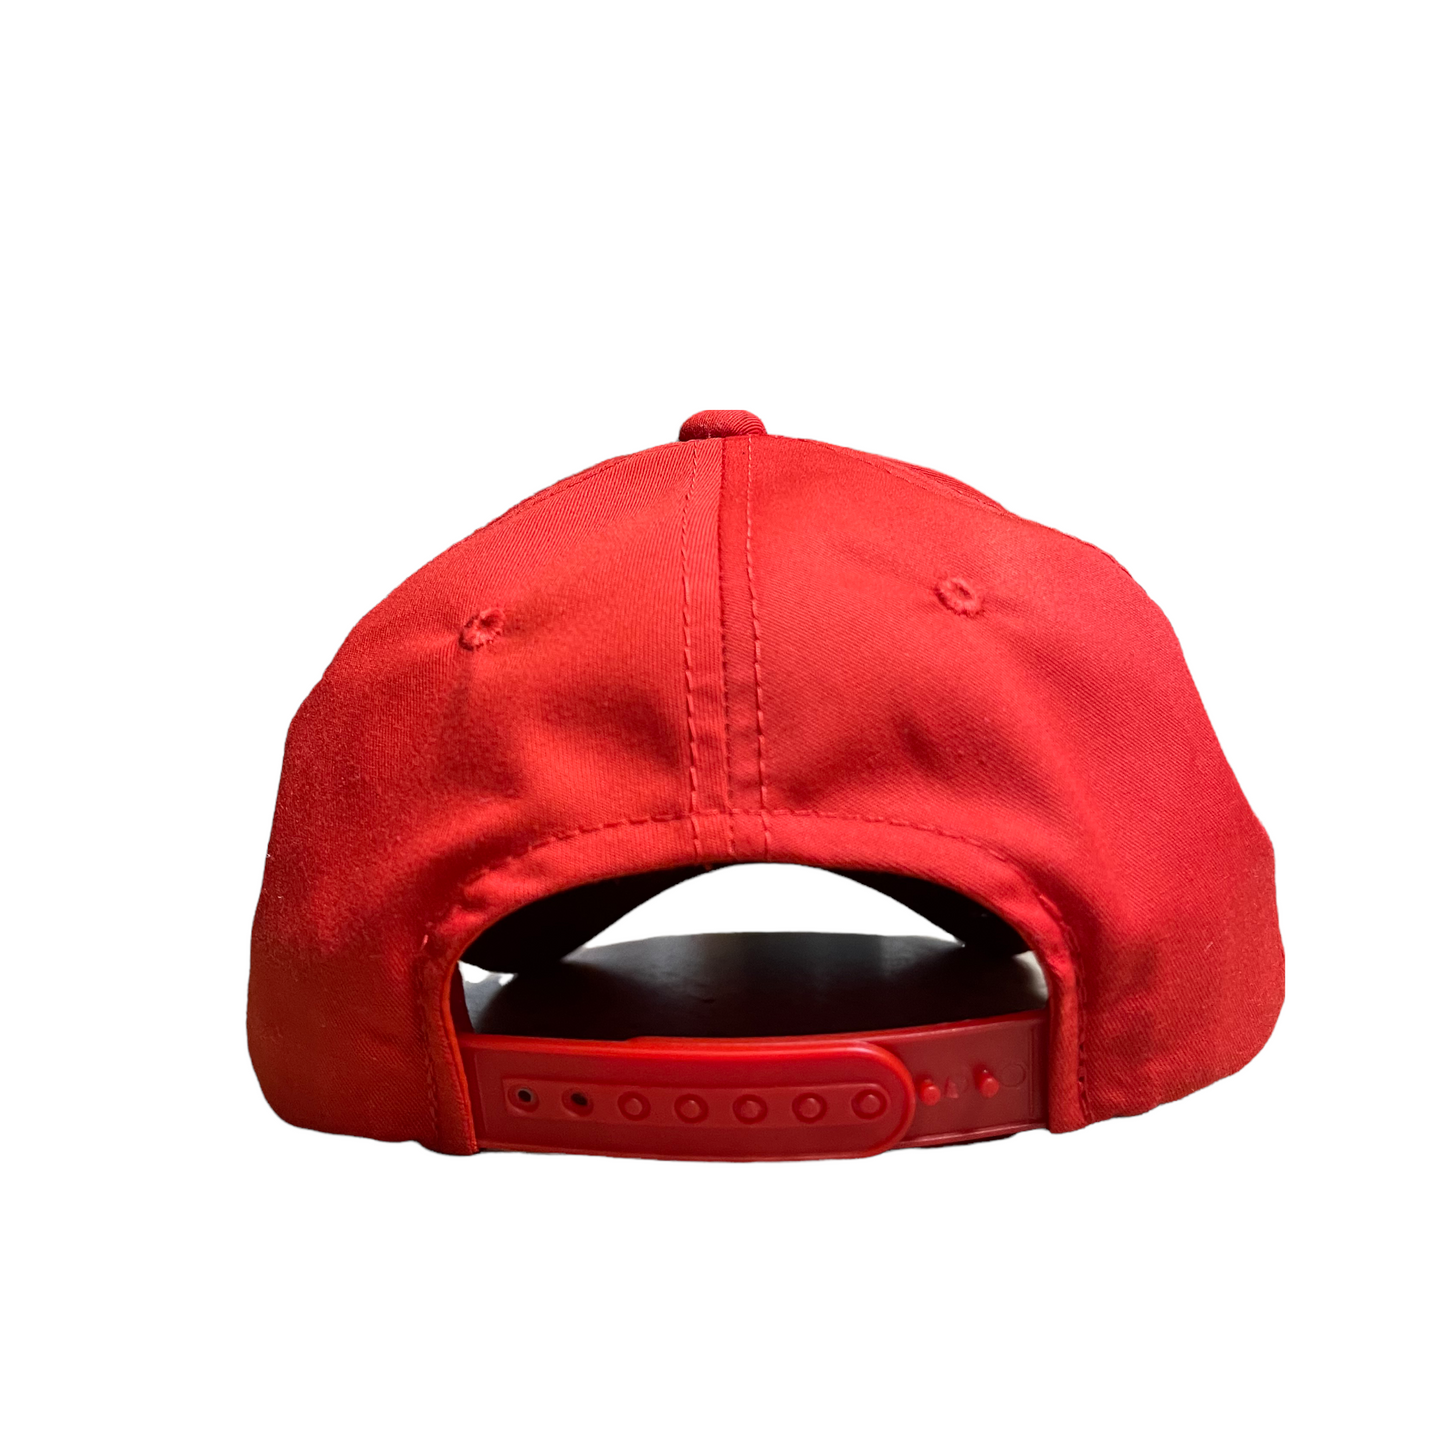 Winners NY 5 Panel Hat - Red/Multi